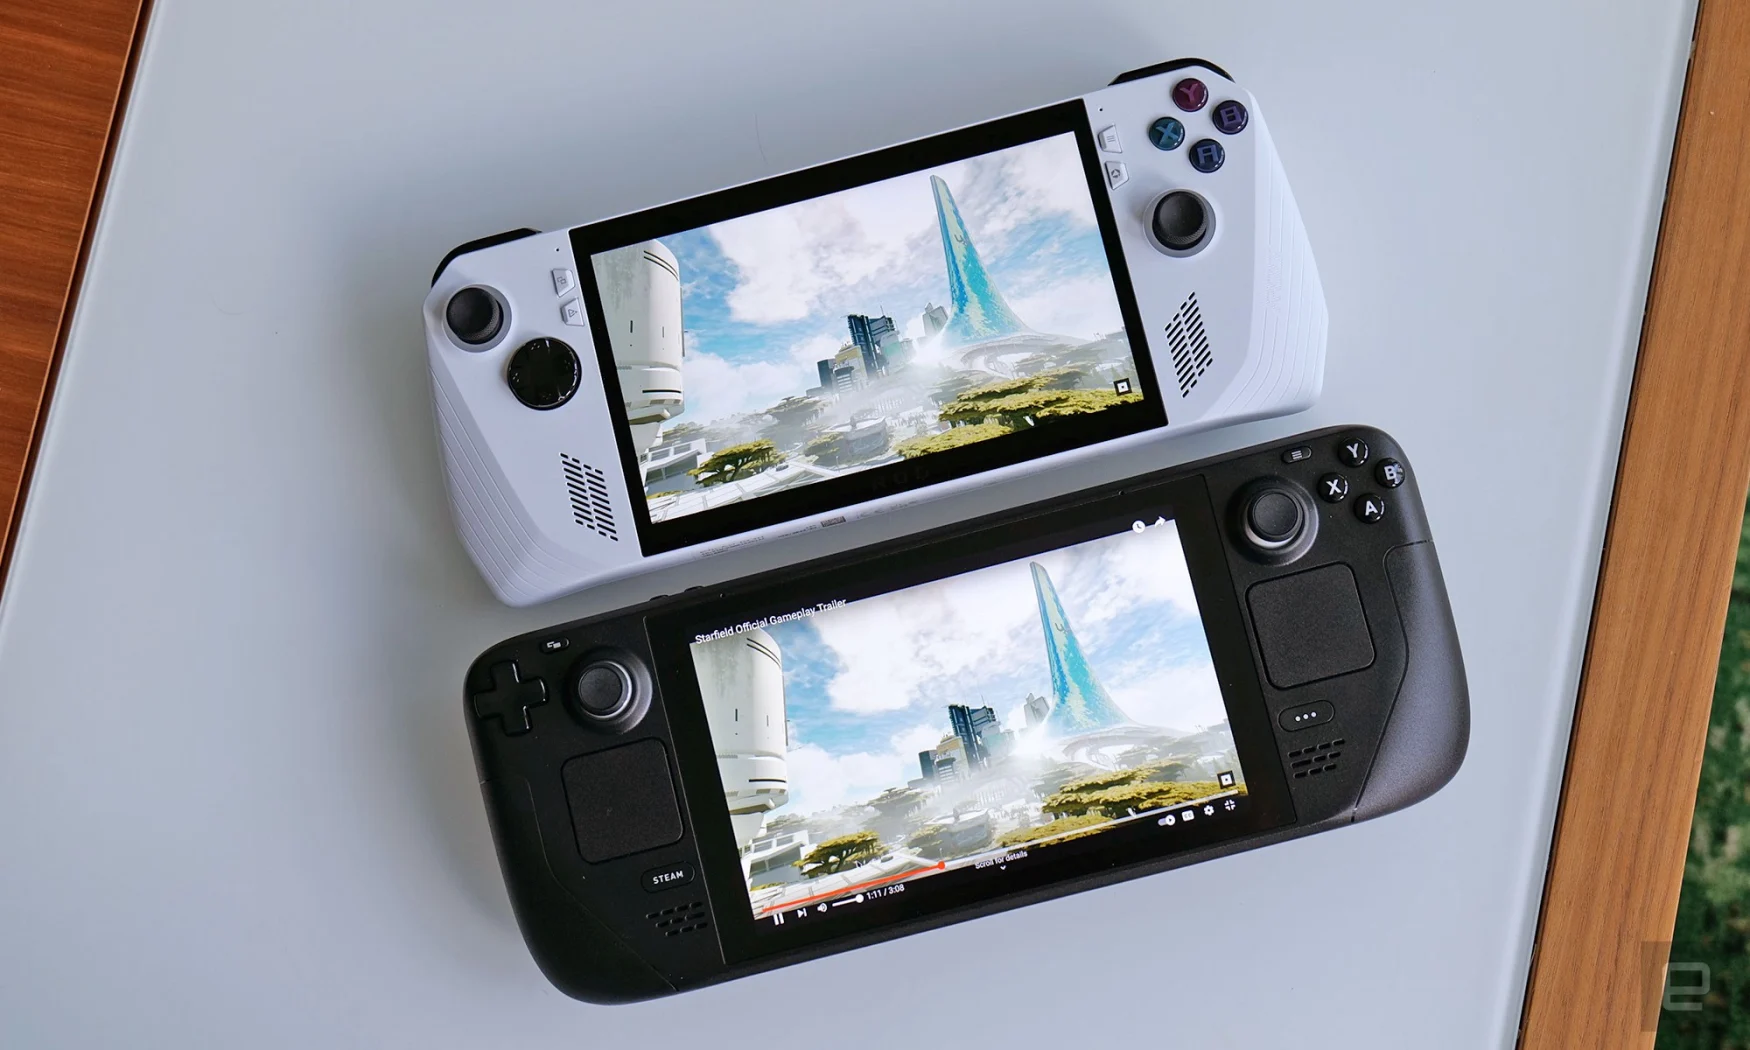 Lenovo Legion Go hands-on: A more Switch-like handheld gaming PC | DeviceDaily.com